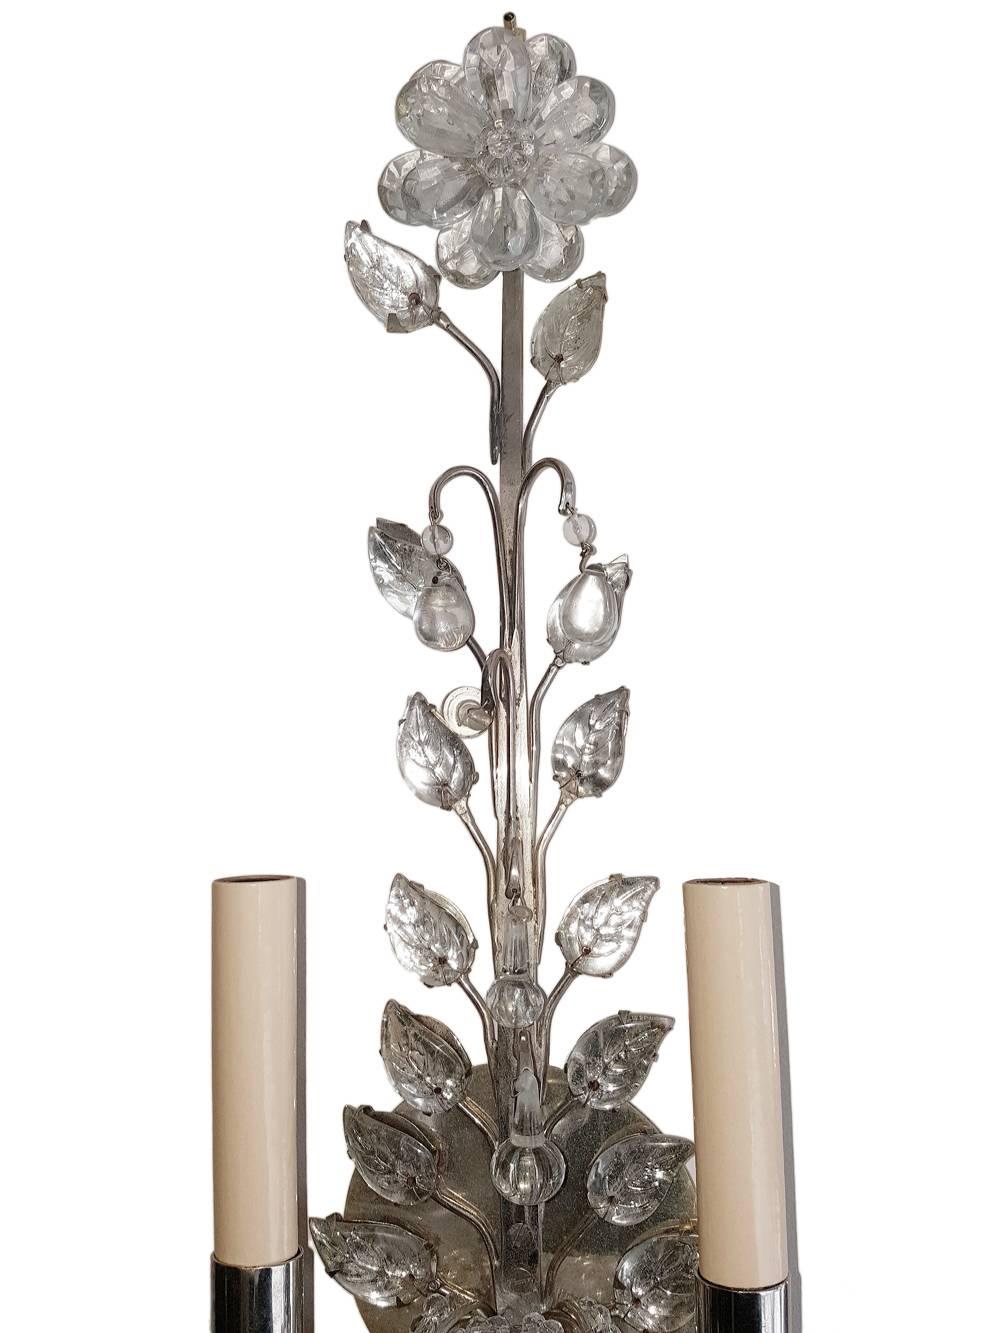 Pair of French silver plated two-light sconces with crystal flowers and molded and mirrored leaves. Original finish.

Measurements:
Height 21.5